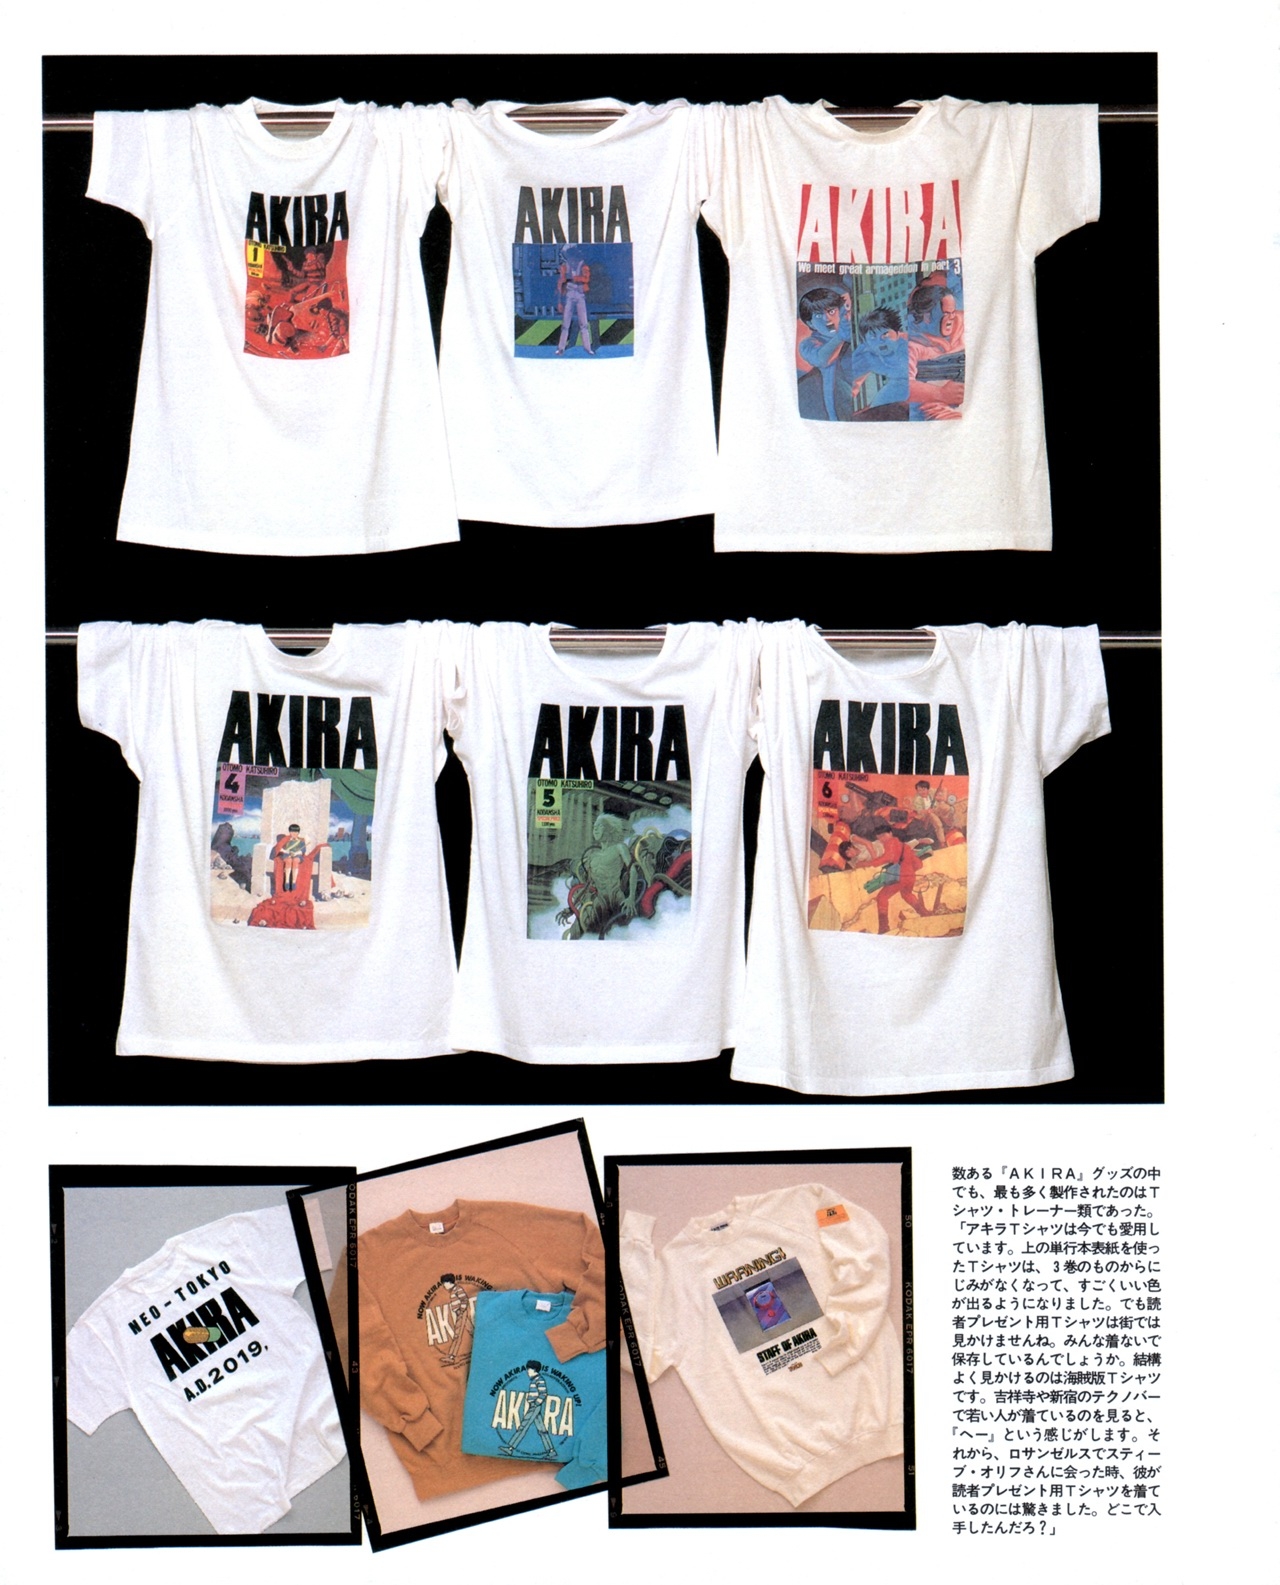 Akira club - The memory of Akira lives on in our hearts! 198